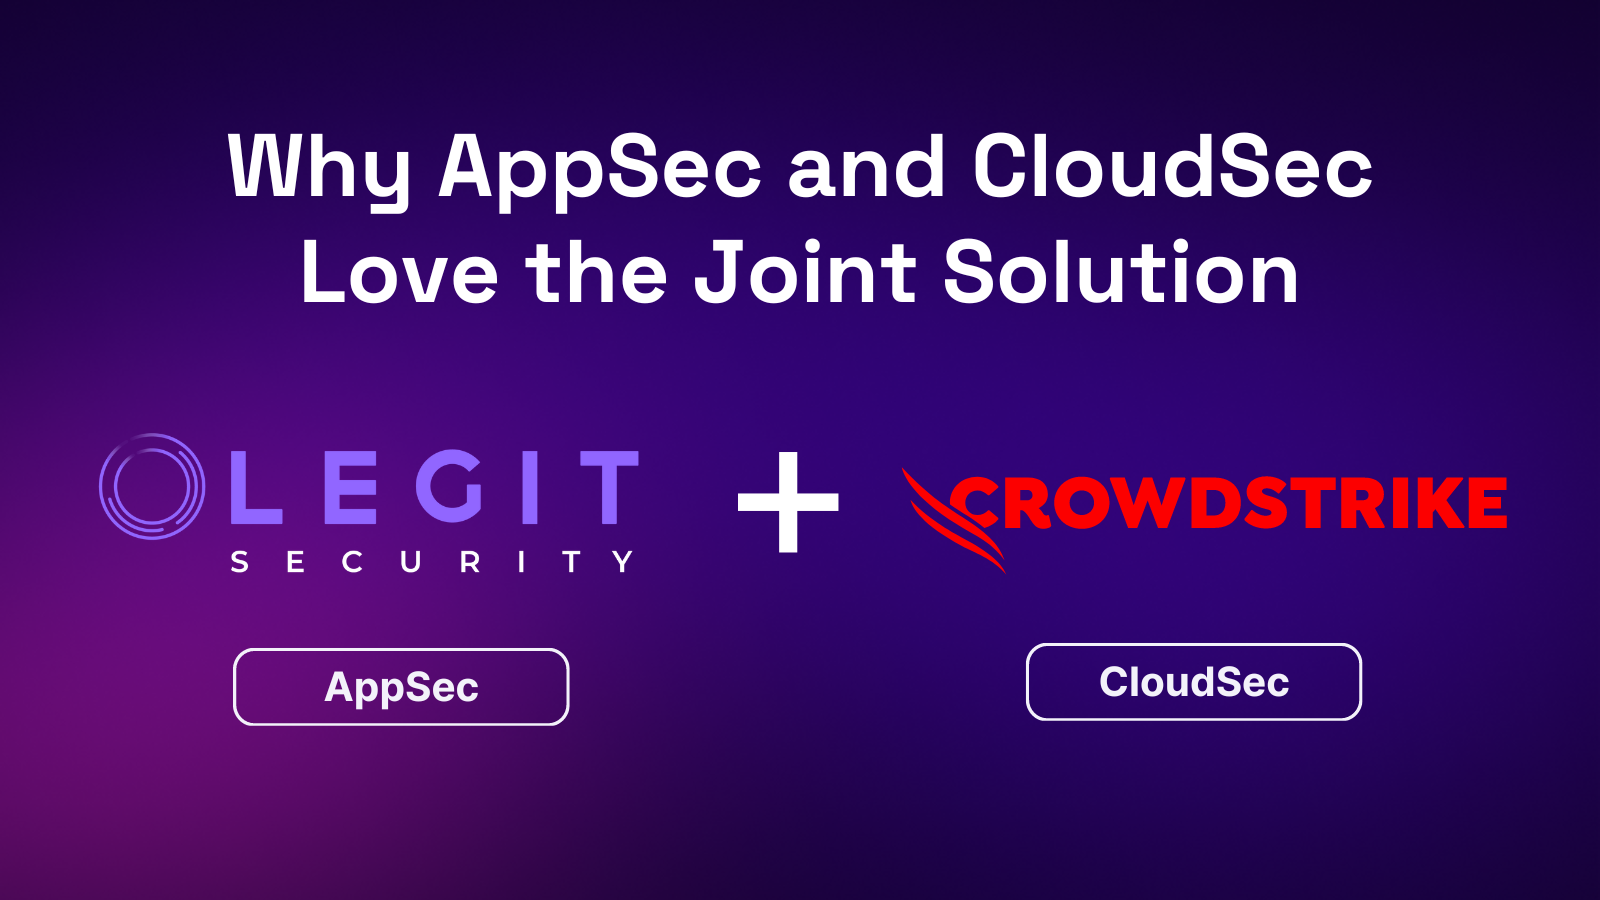 Legit Security and CrowdStrike: Securing Applications from Code Creation to Cloud Deployment